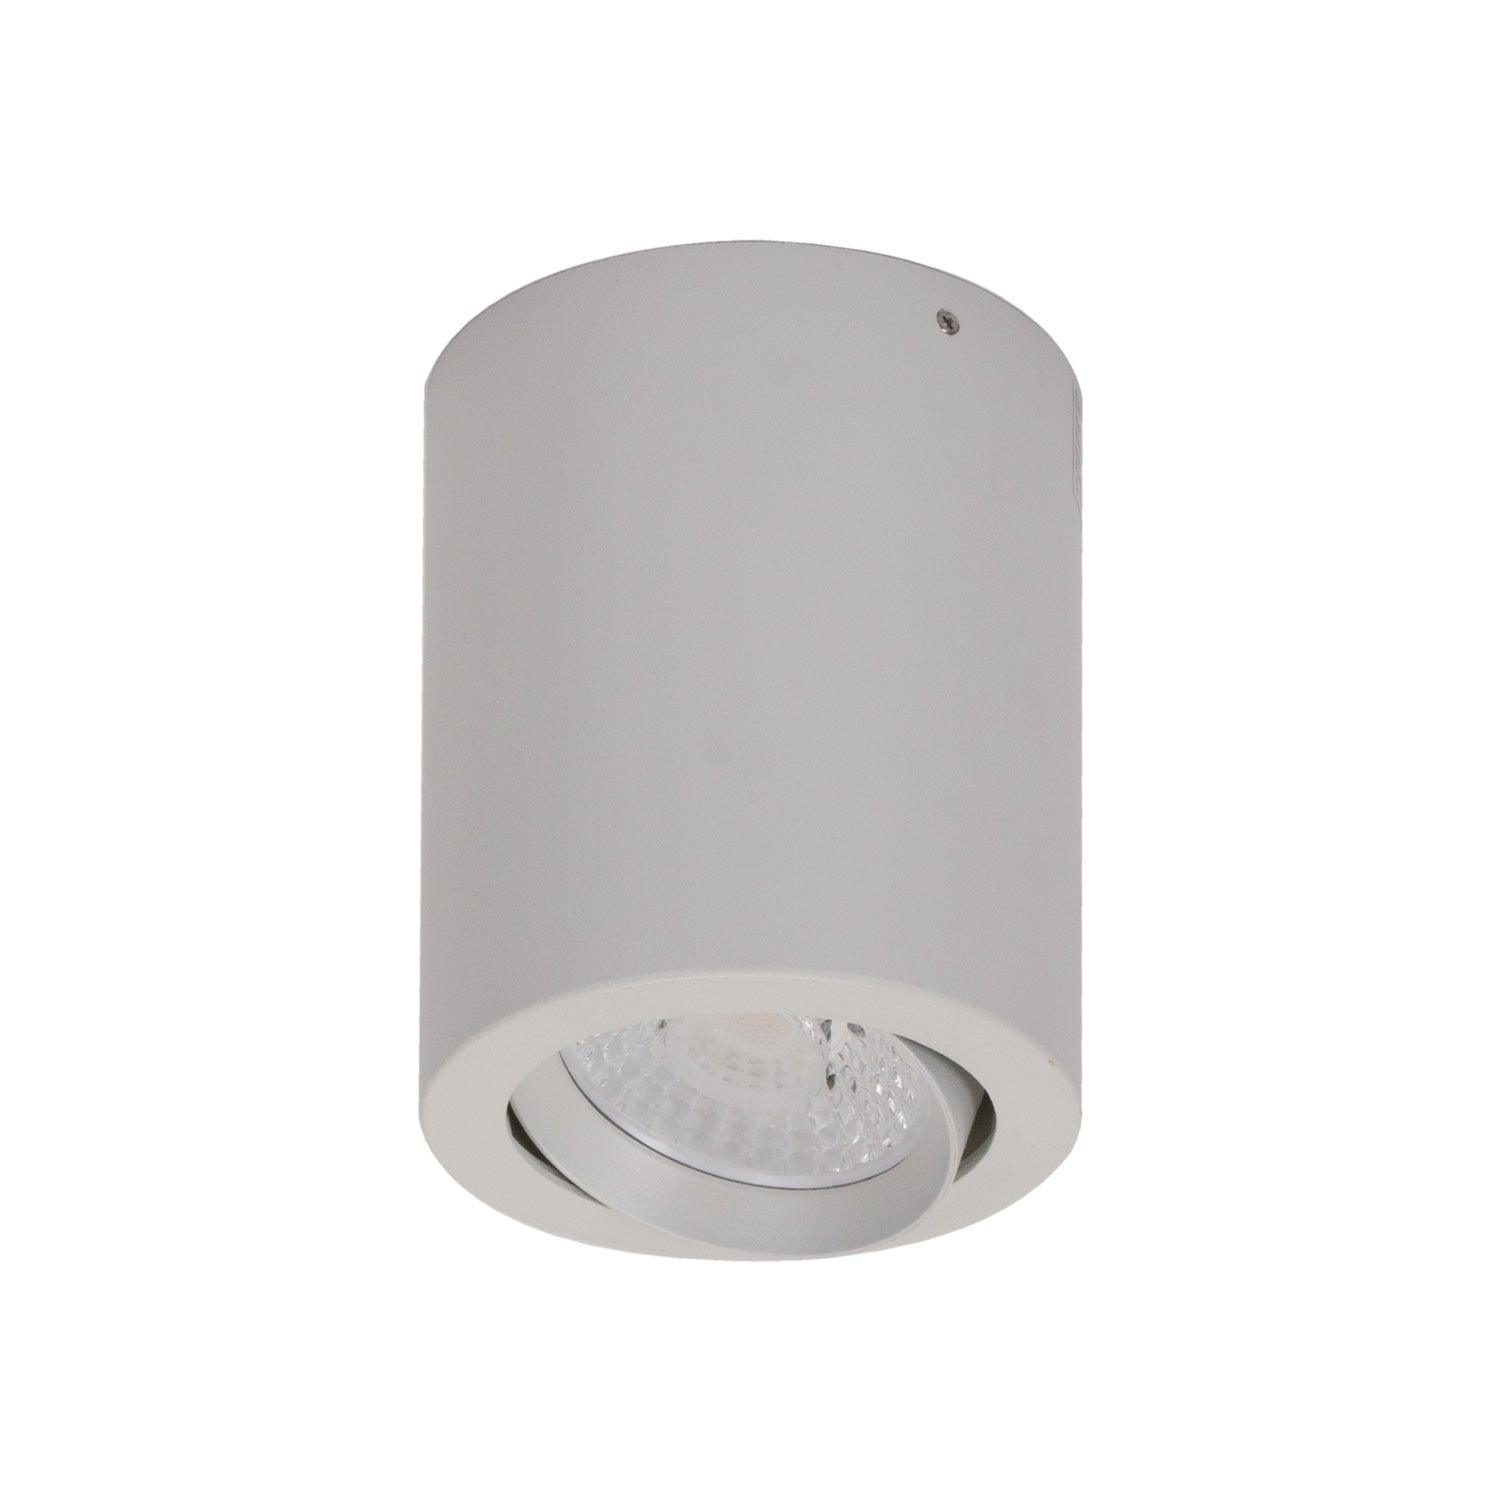 Domus Lighting LED Downlights Neo-SM Tiltable Surface Mounted Led Downlight Lights-For-You